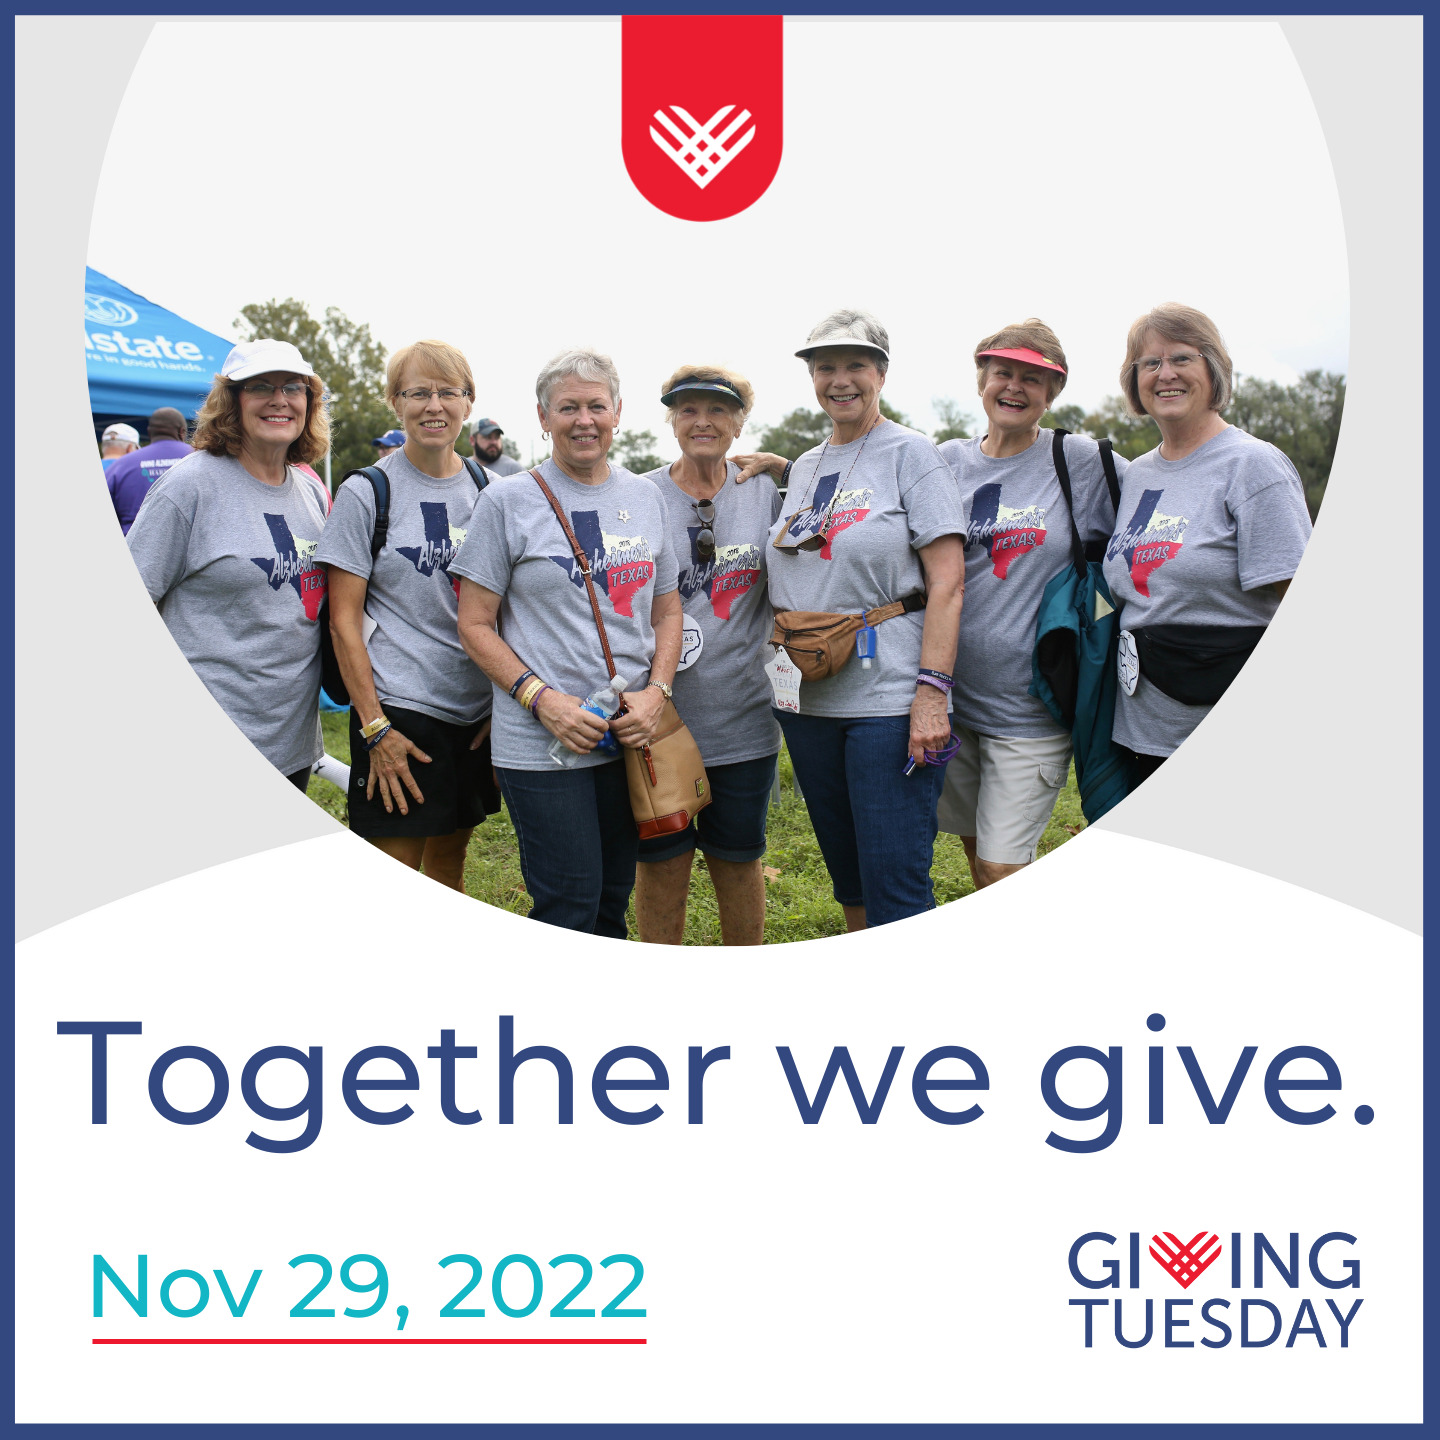 Giving Tuesday, Nov. 29, 2022 - Donate Here